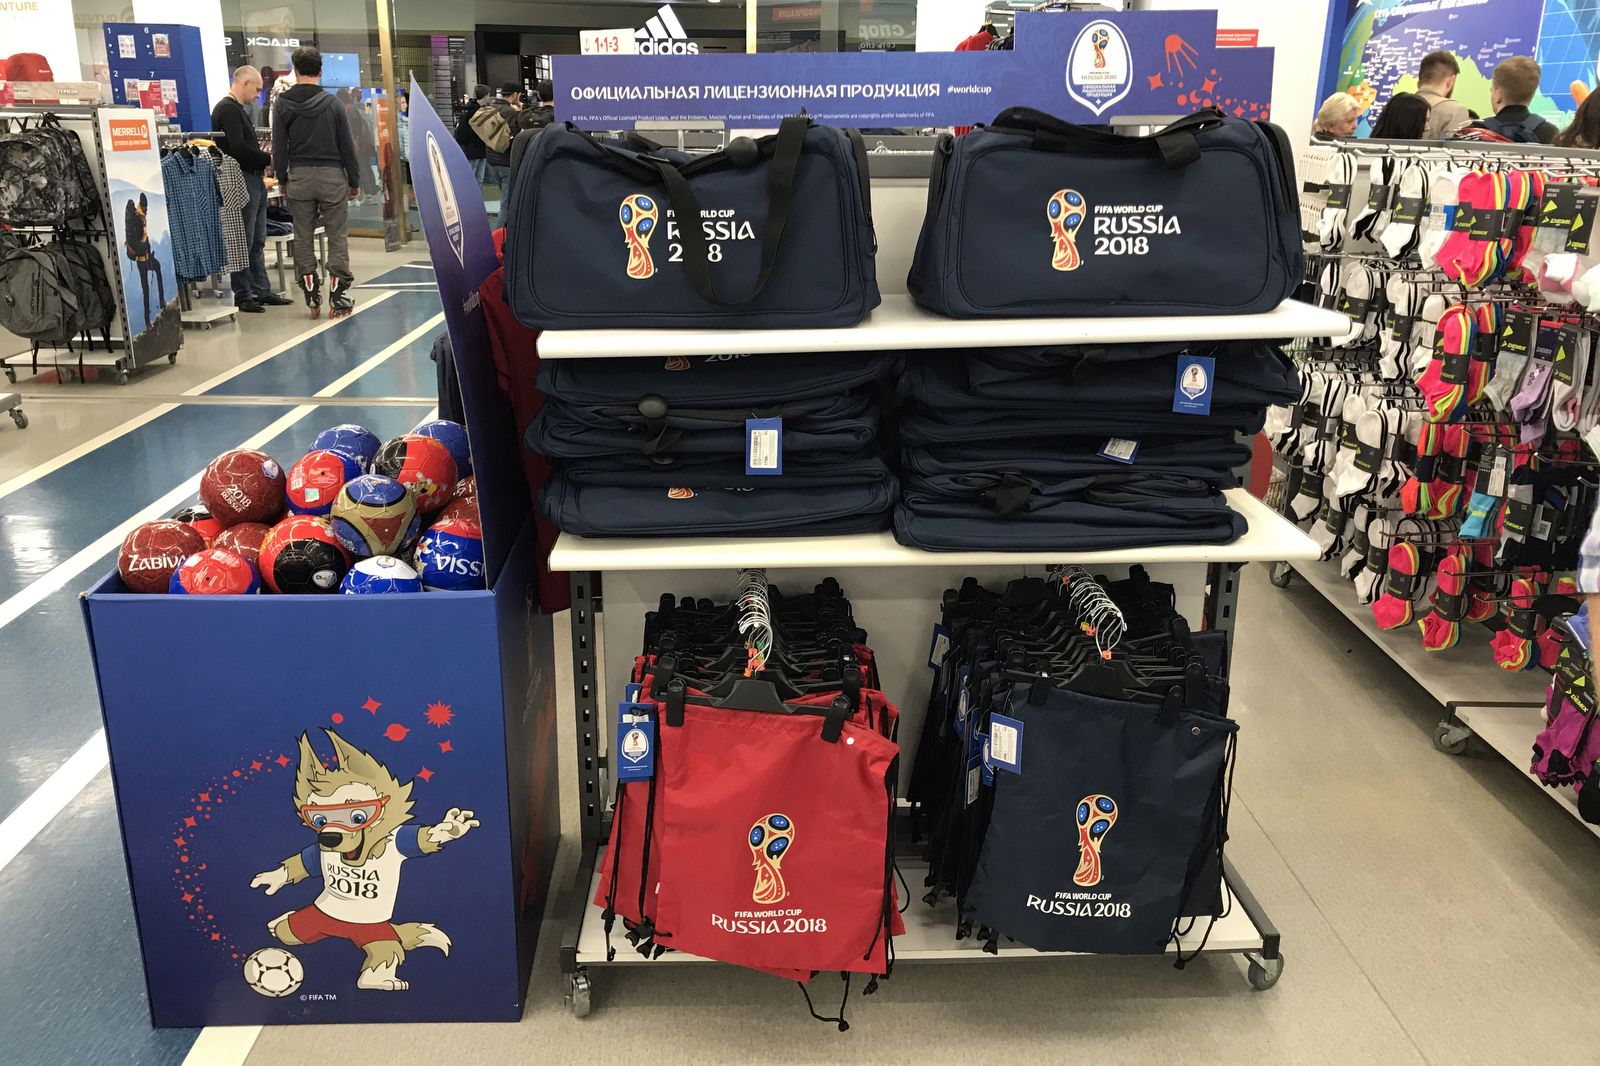 More FIFA merchandise on sale in a St Petersburg shopping mall. The bag we bought is on the bottom right